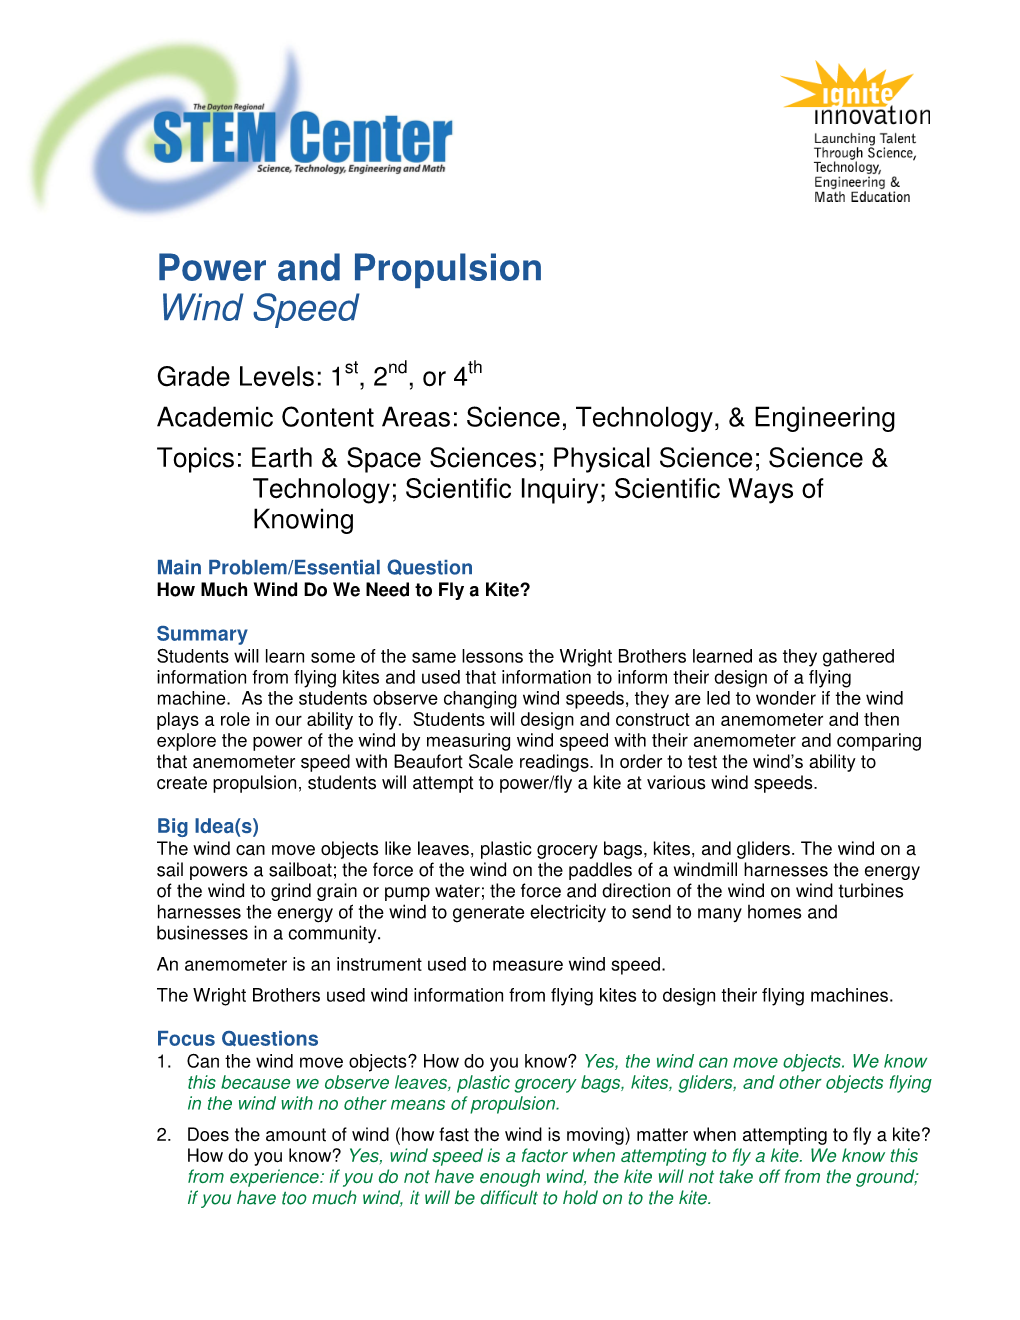 Power and Propulsion Wind Speed